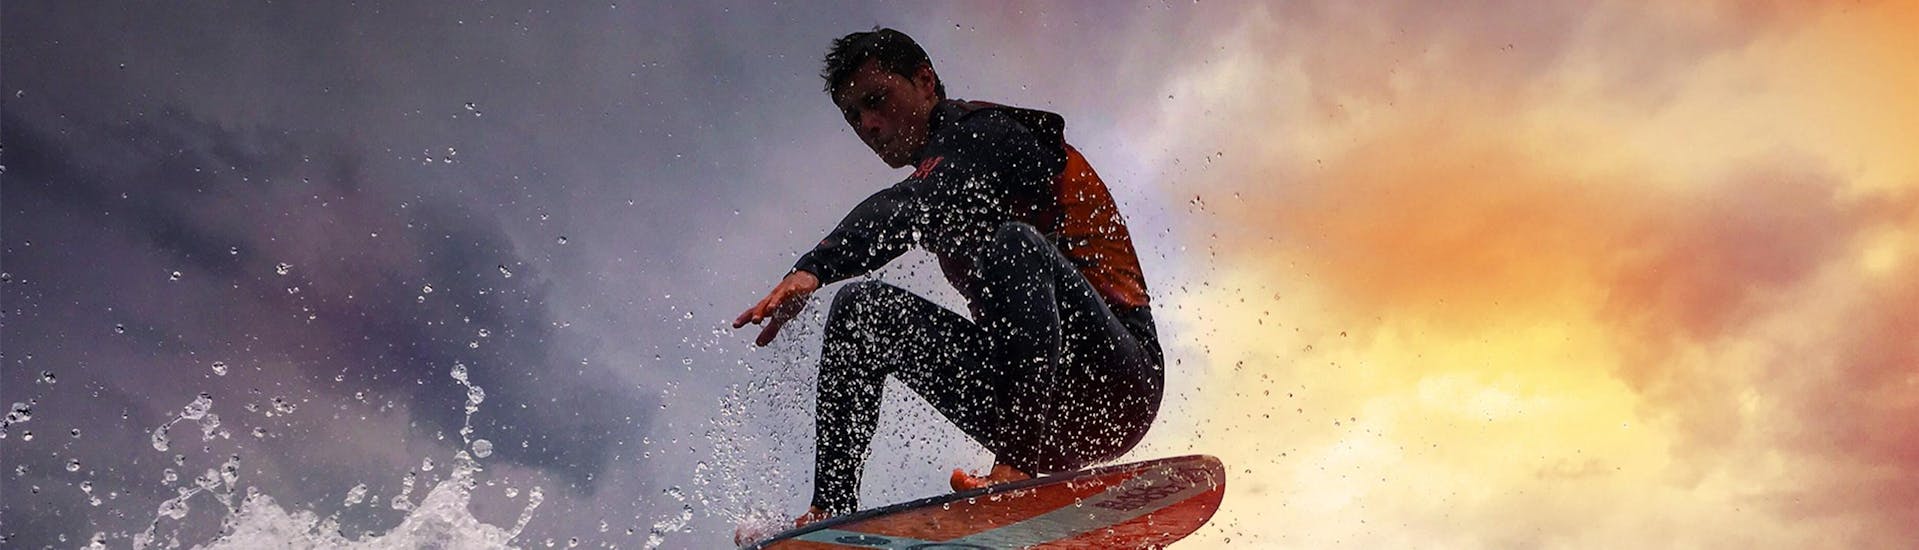 A man is surfing on a wave thanks to Le Spot which offers waterskiing lessons, wakesurfing lessons and wakeboarding lessons on Lake Annecy.